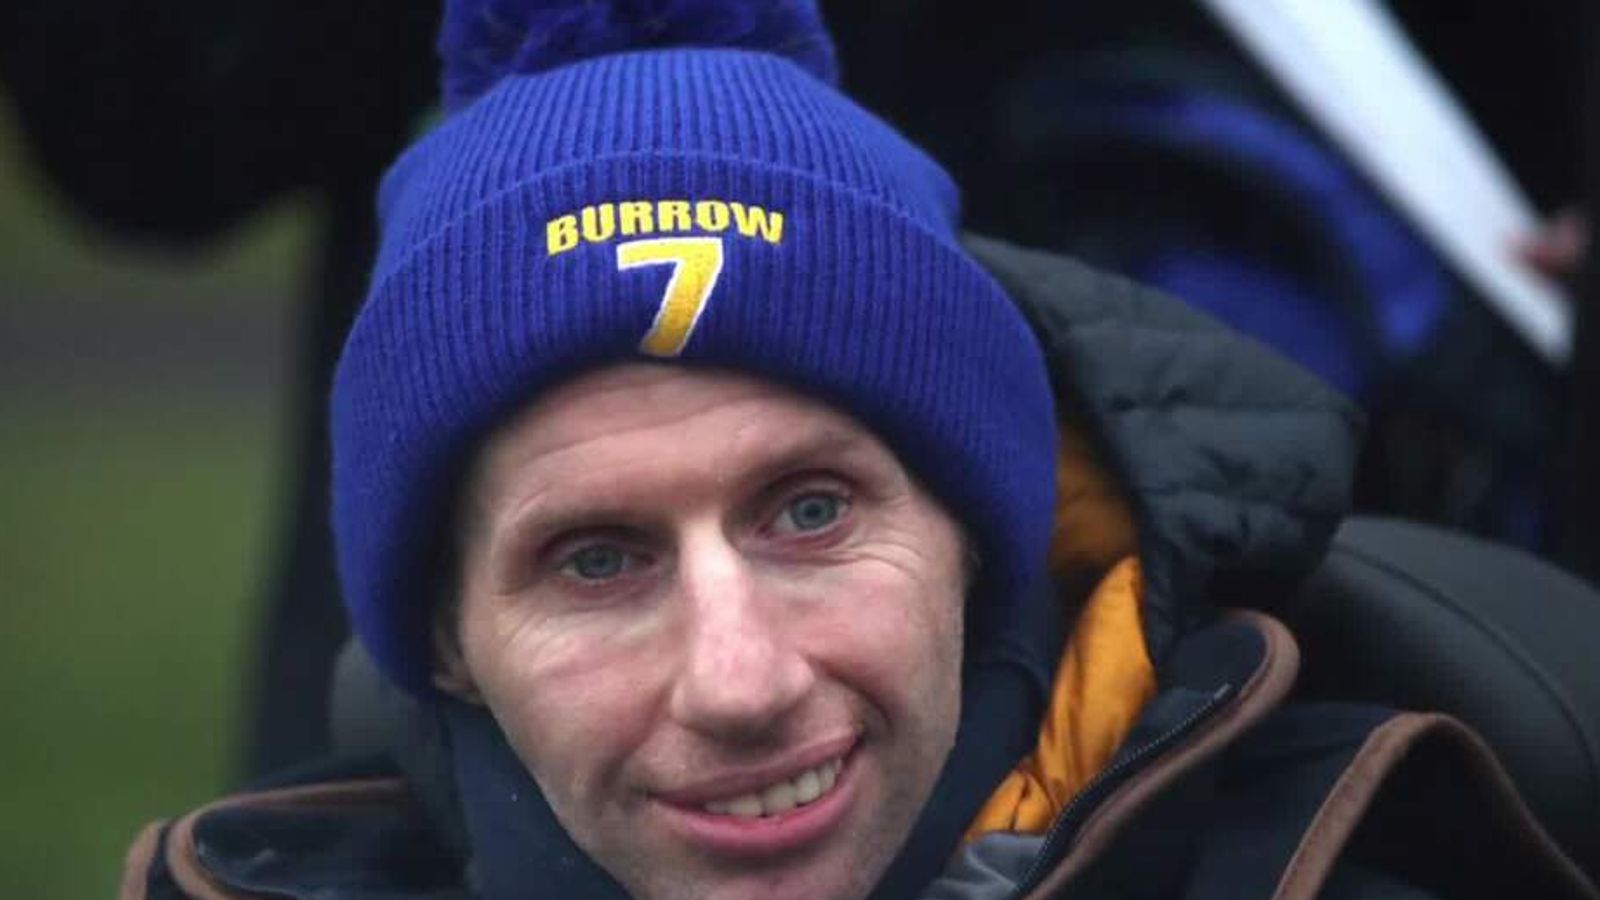 Former rugby player Rob Burrow dies aged 41